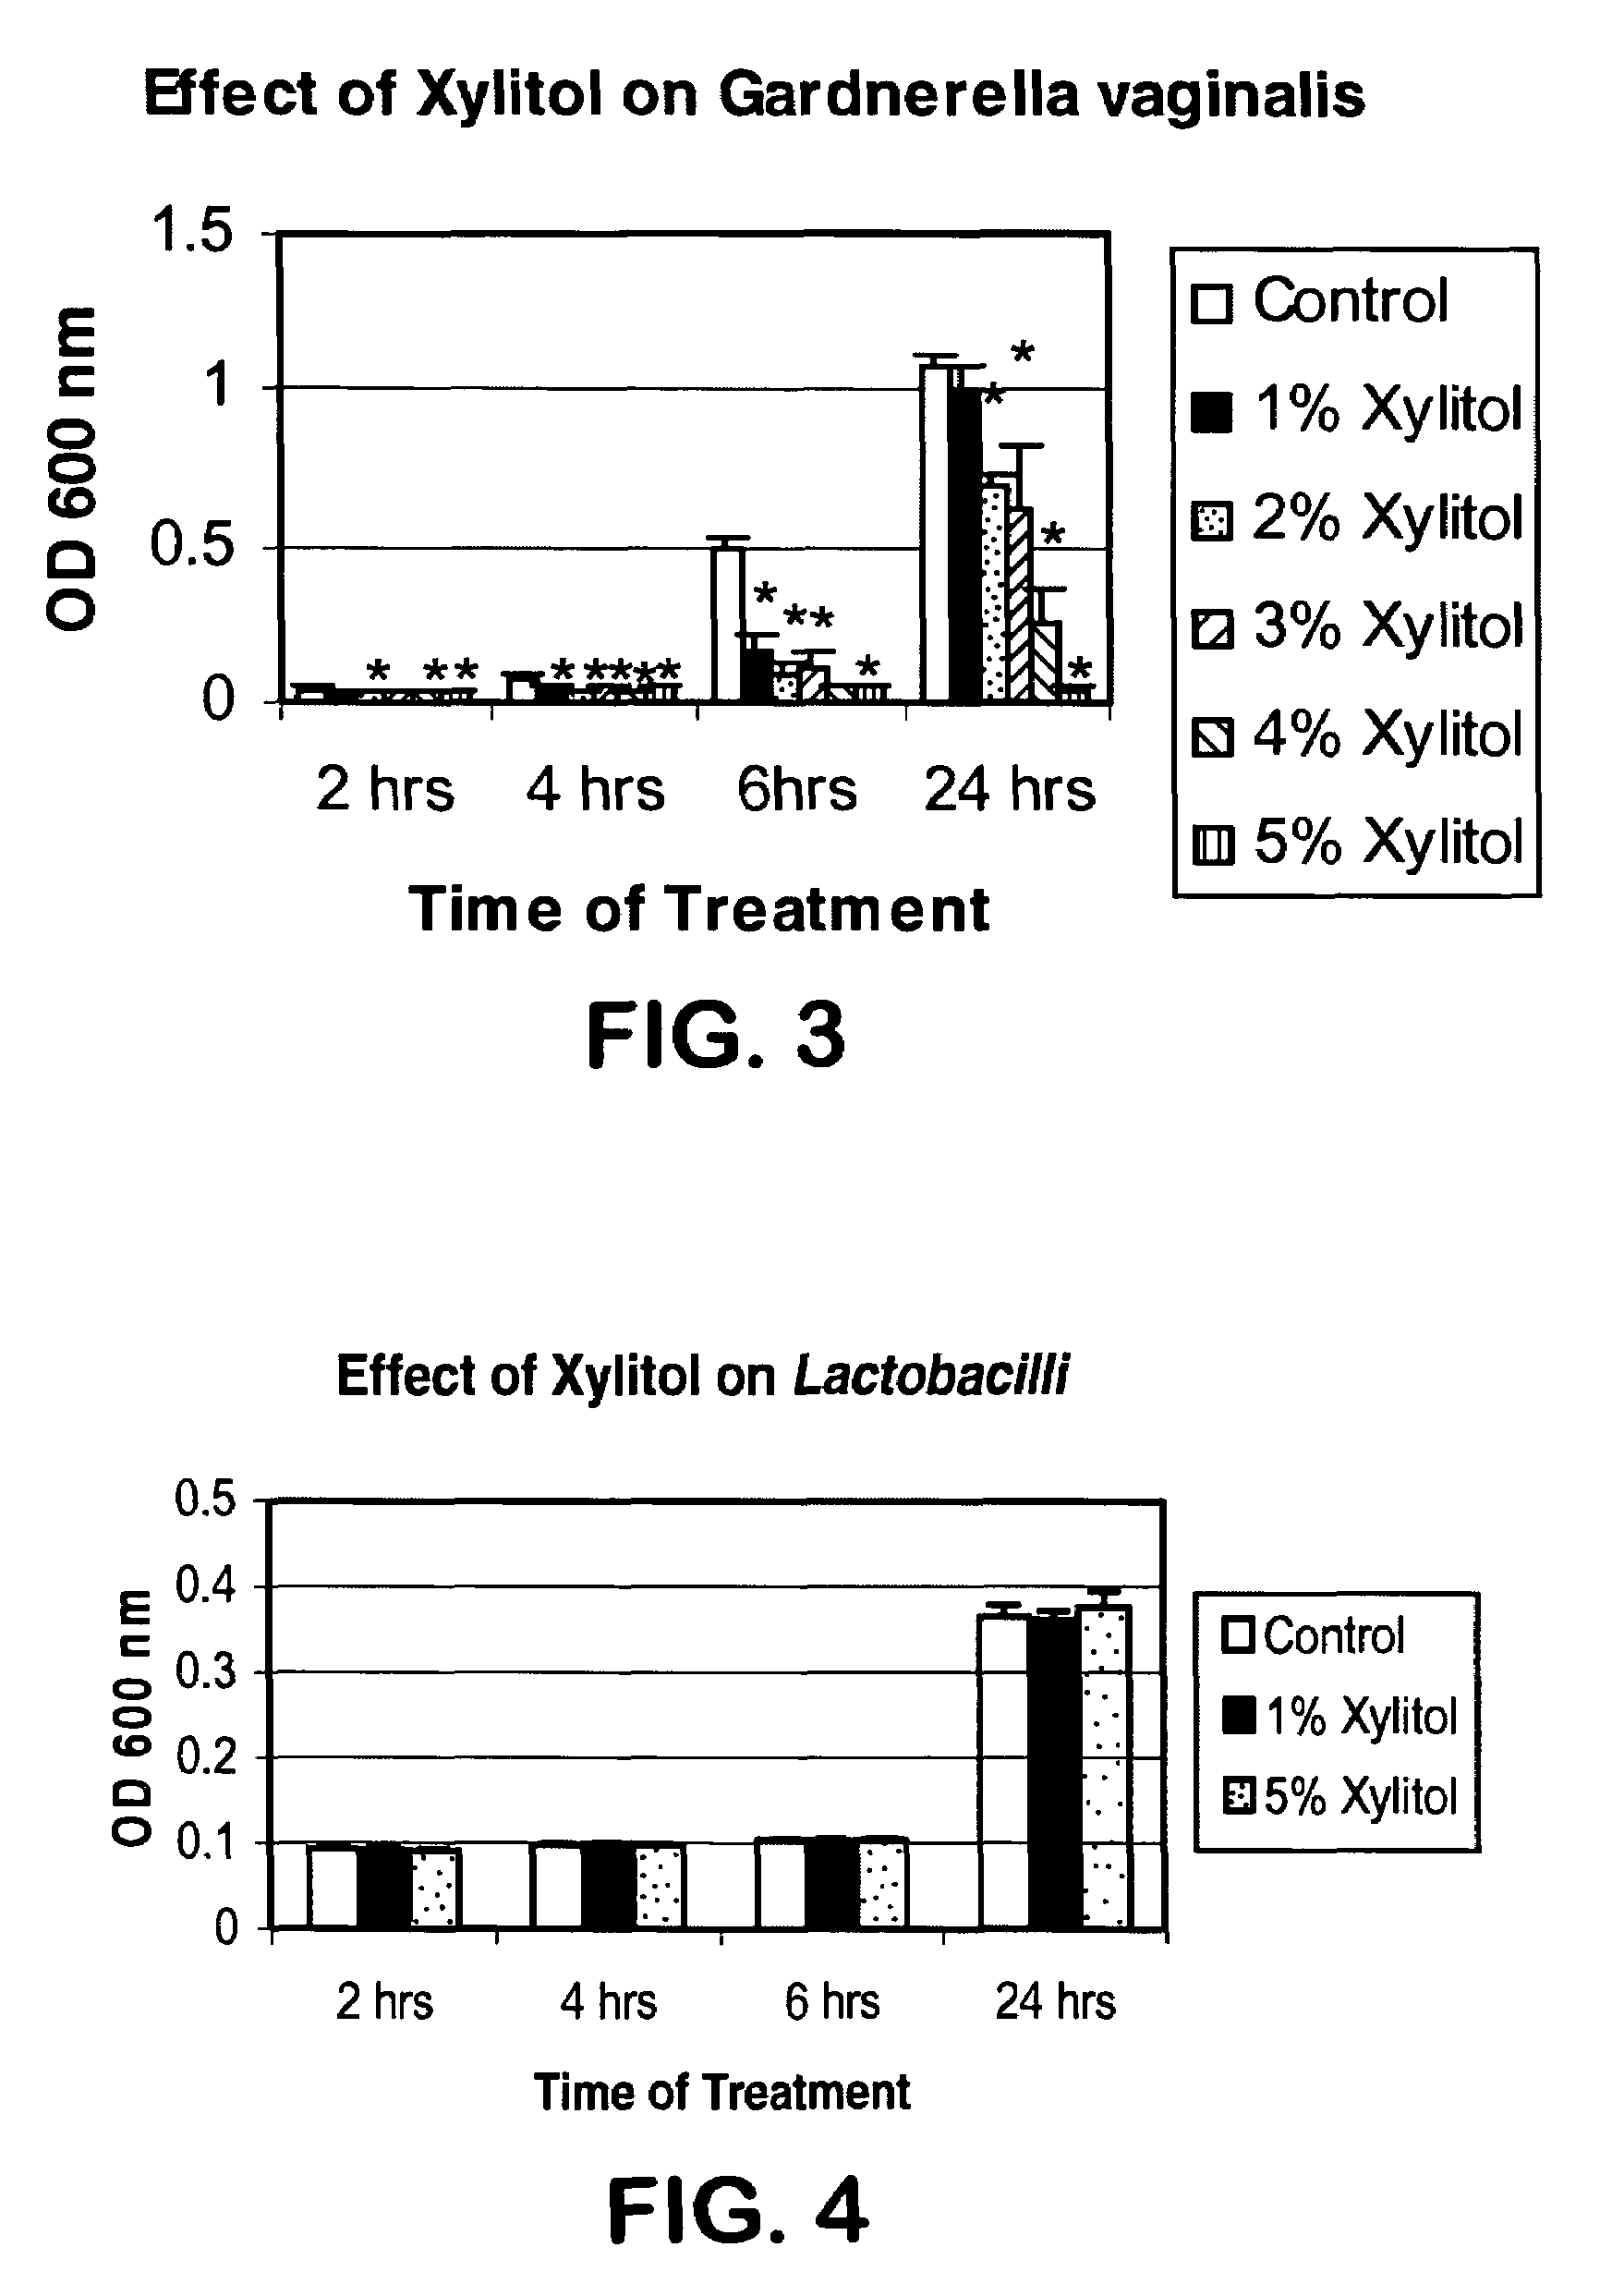 Xylitol for treatment of vaginal infections